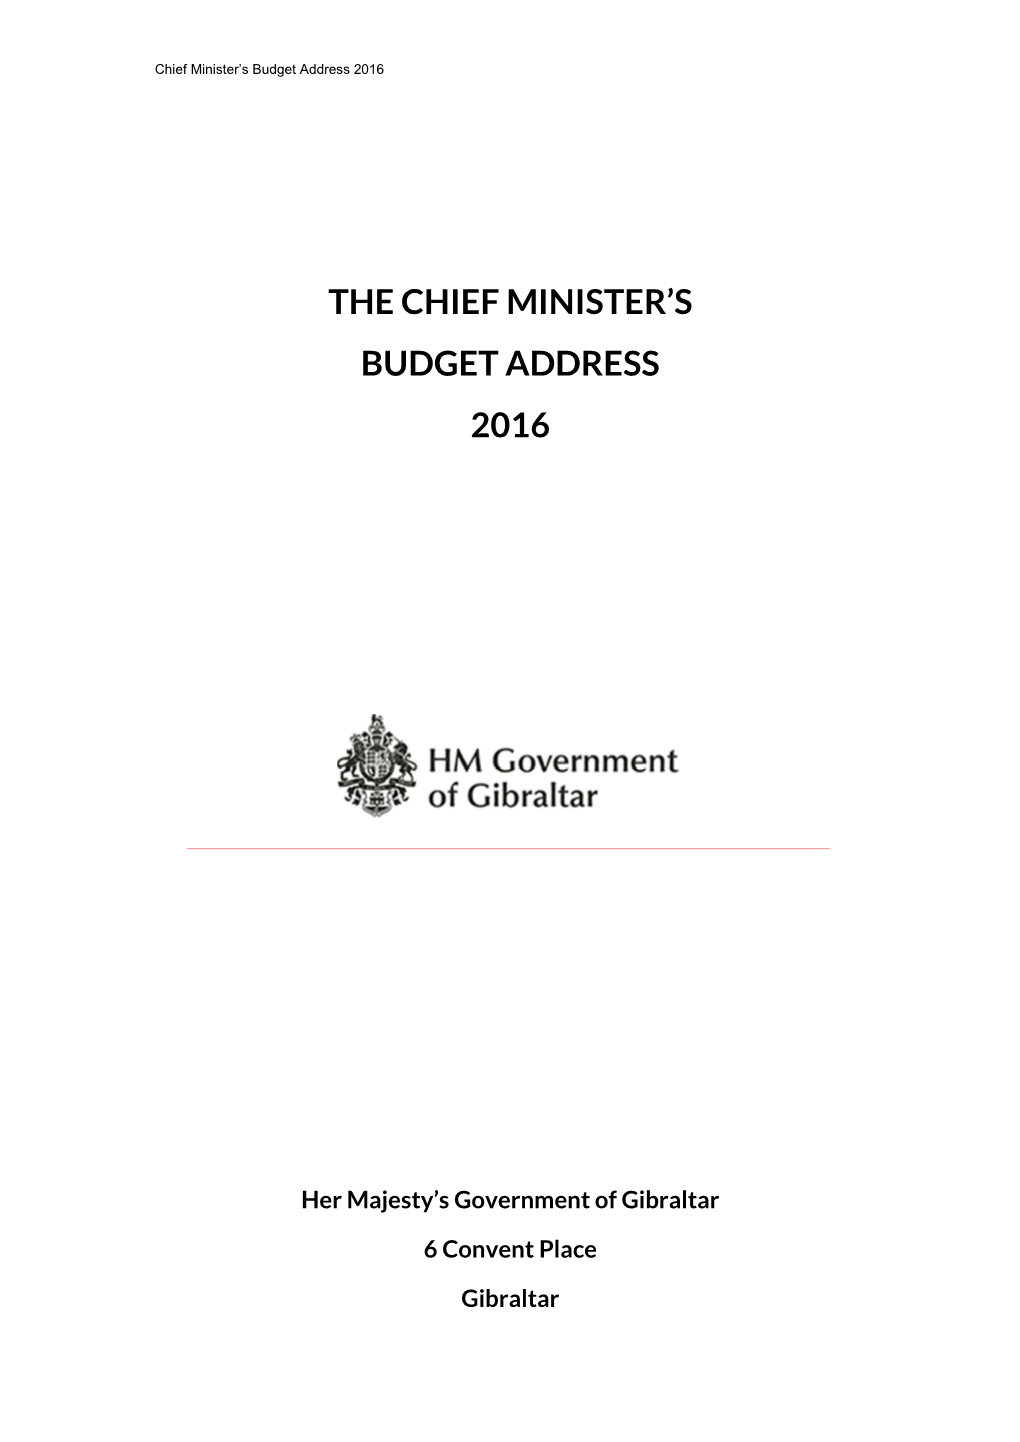 The Chief Minister's Budget Address 2016